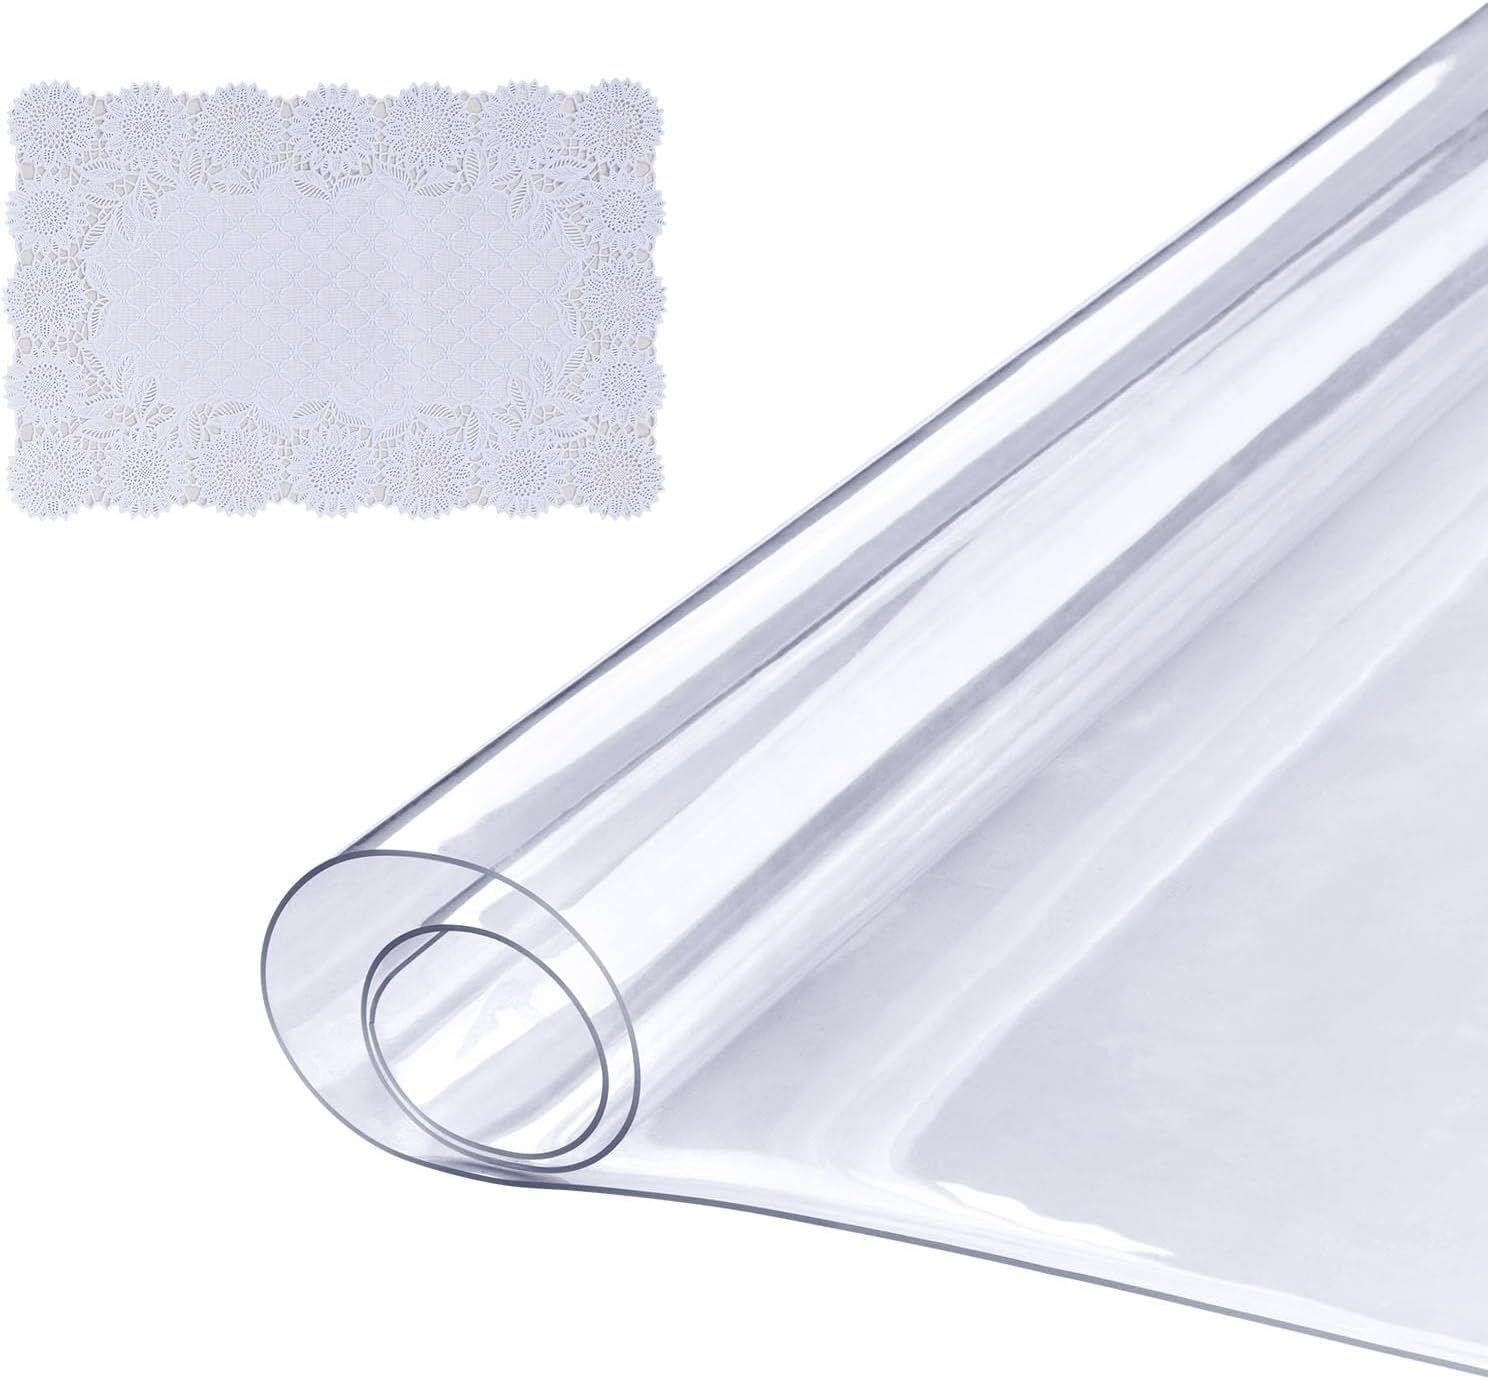 Clear Table Cover Protector